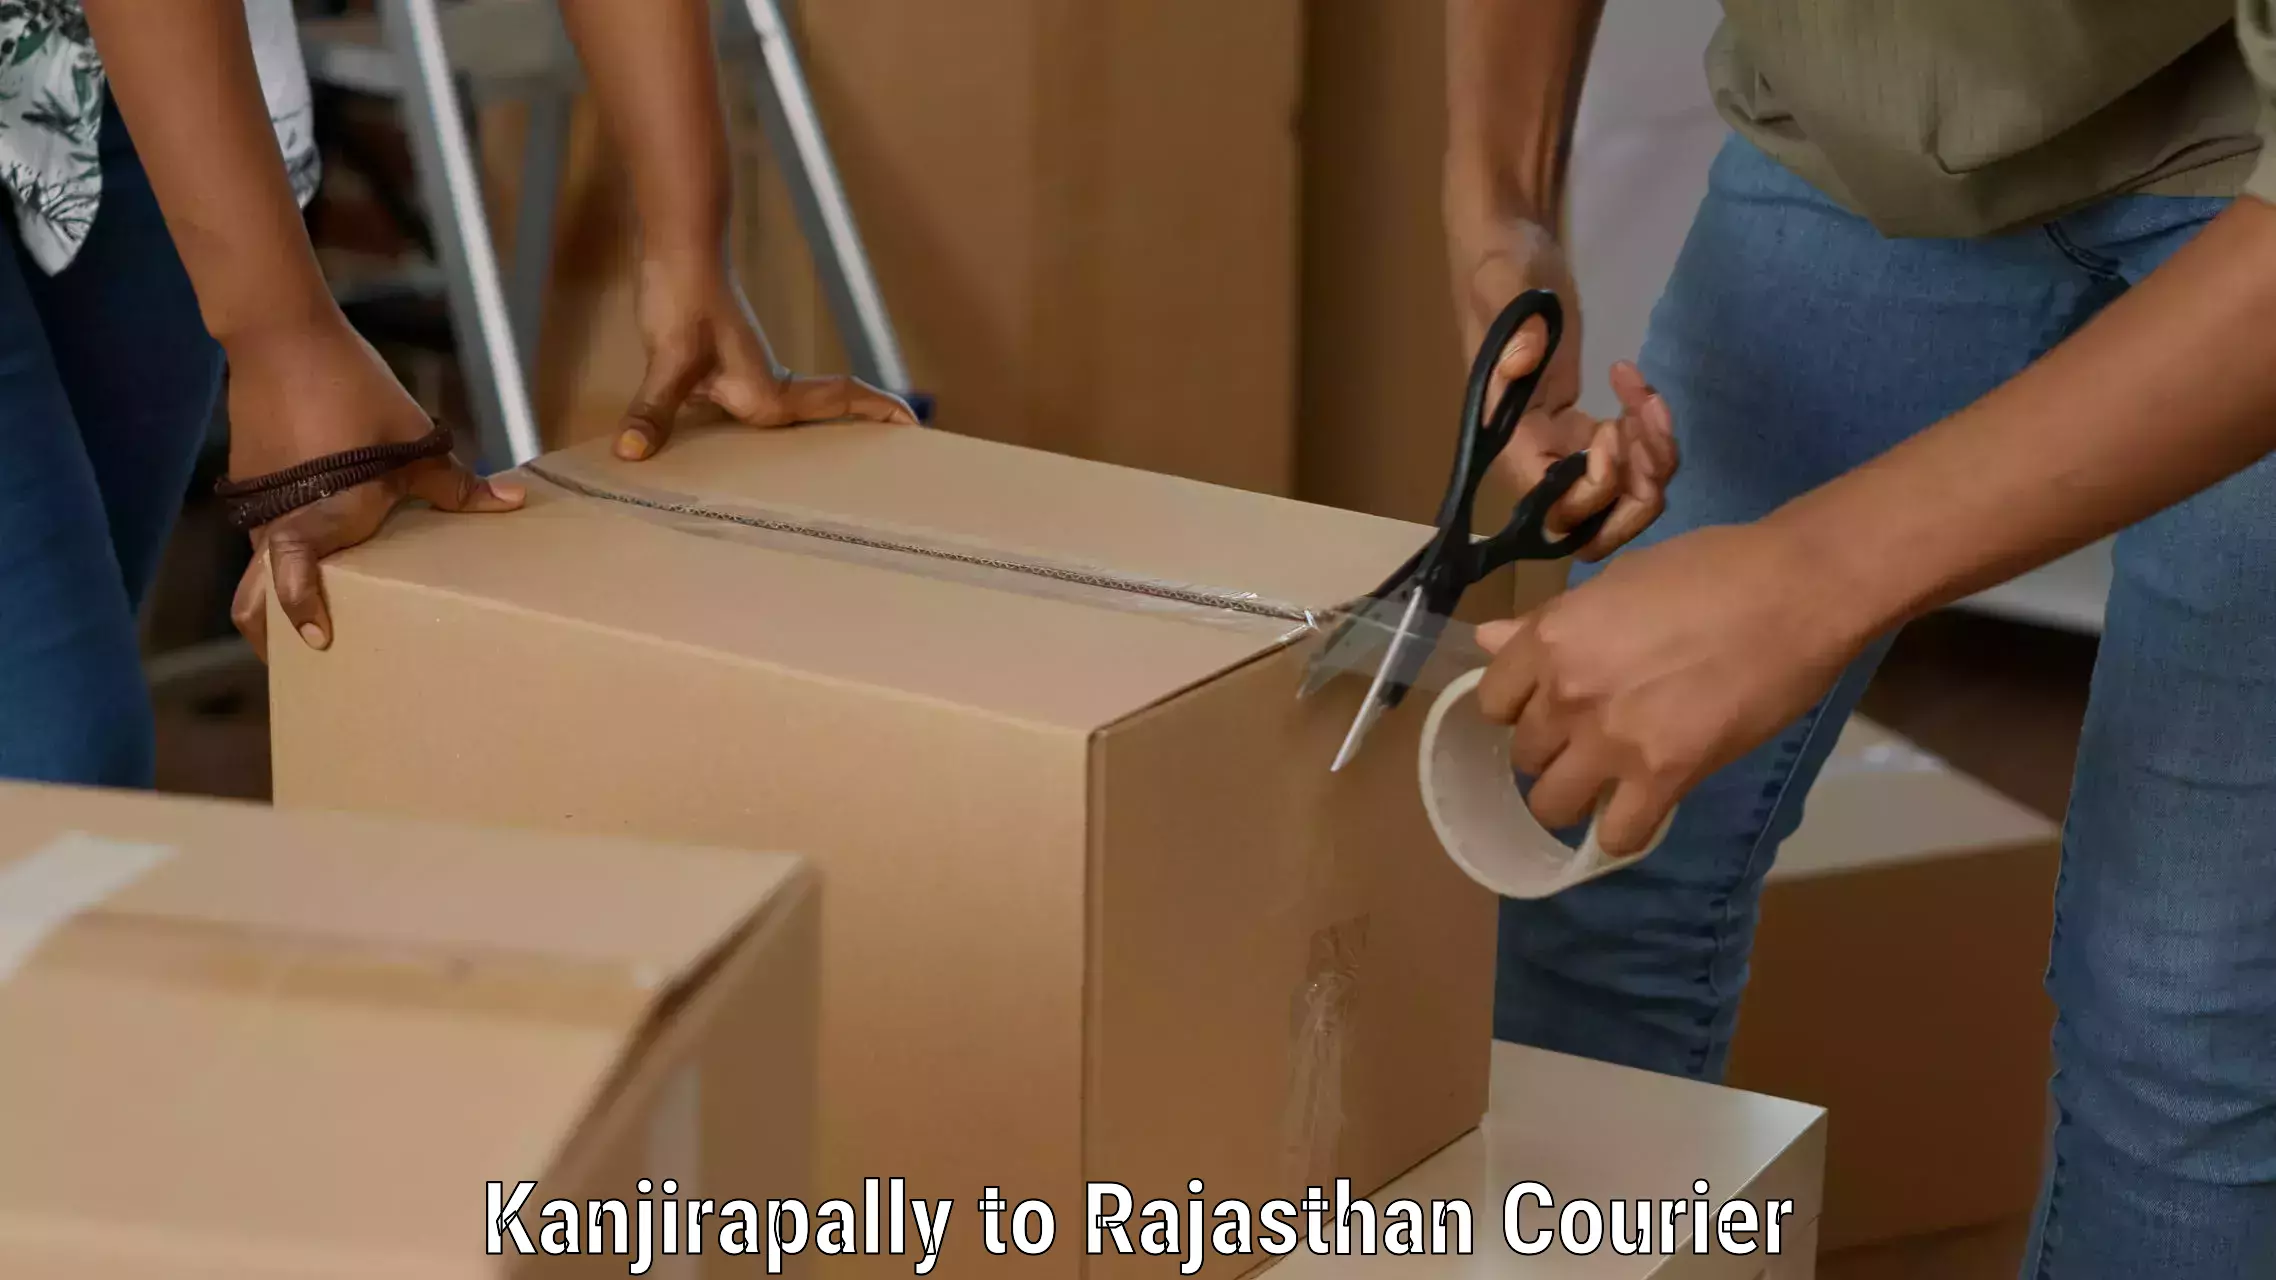 24/7 courier service Kanjirapally to Rajasthan